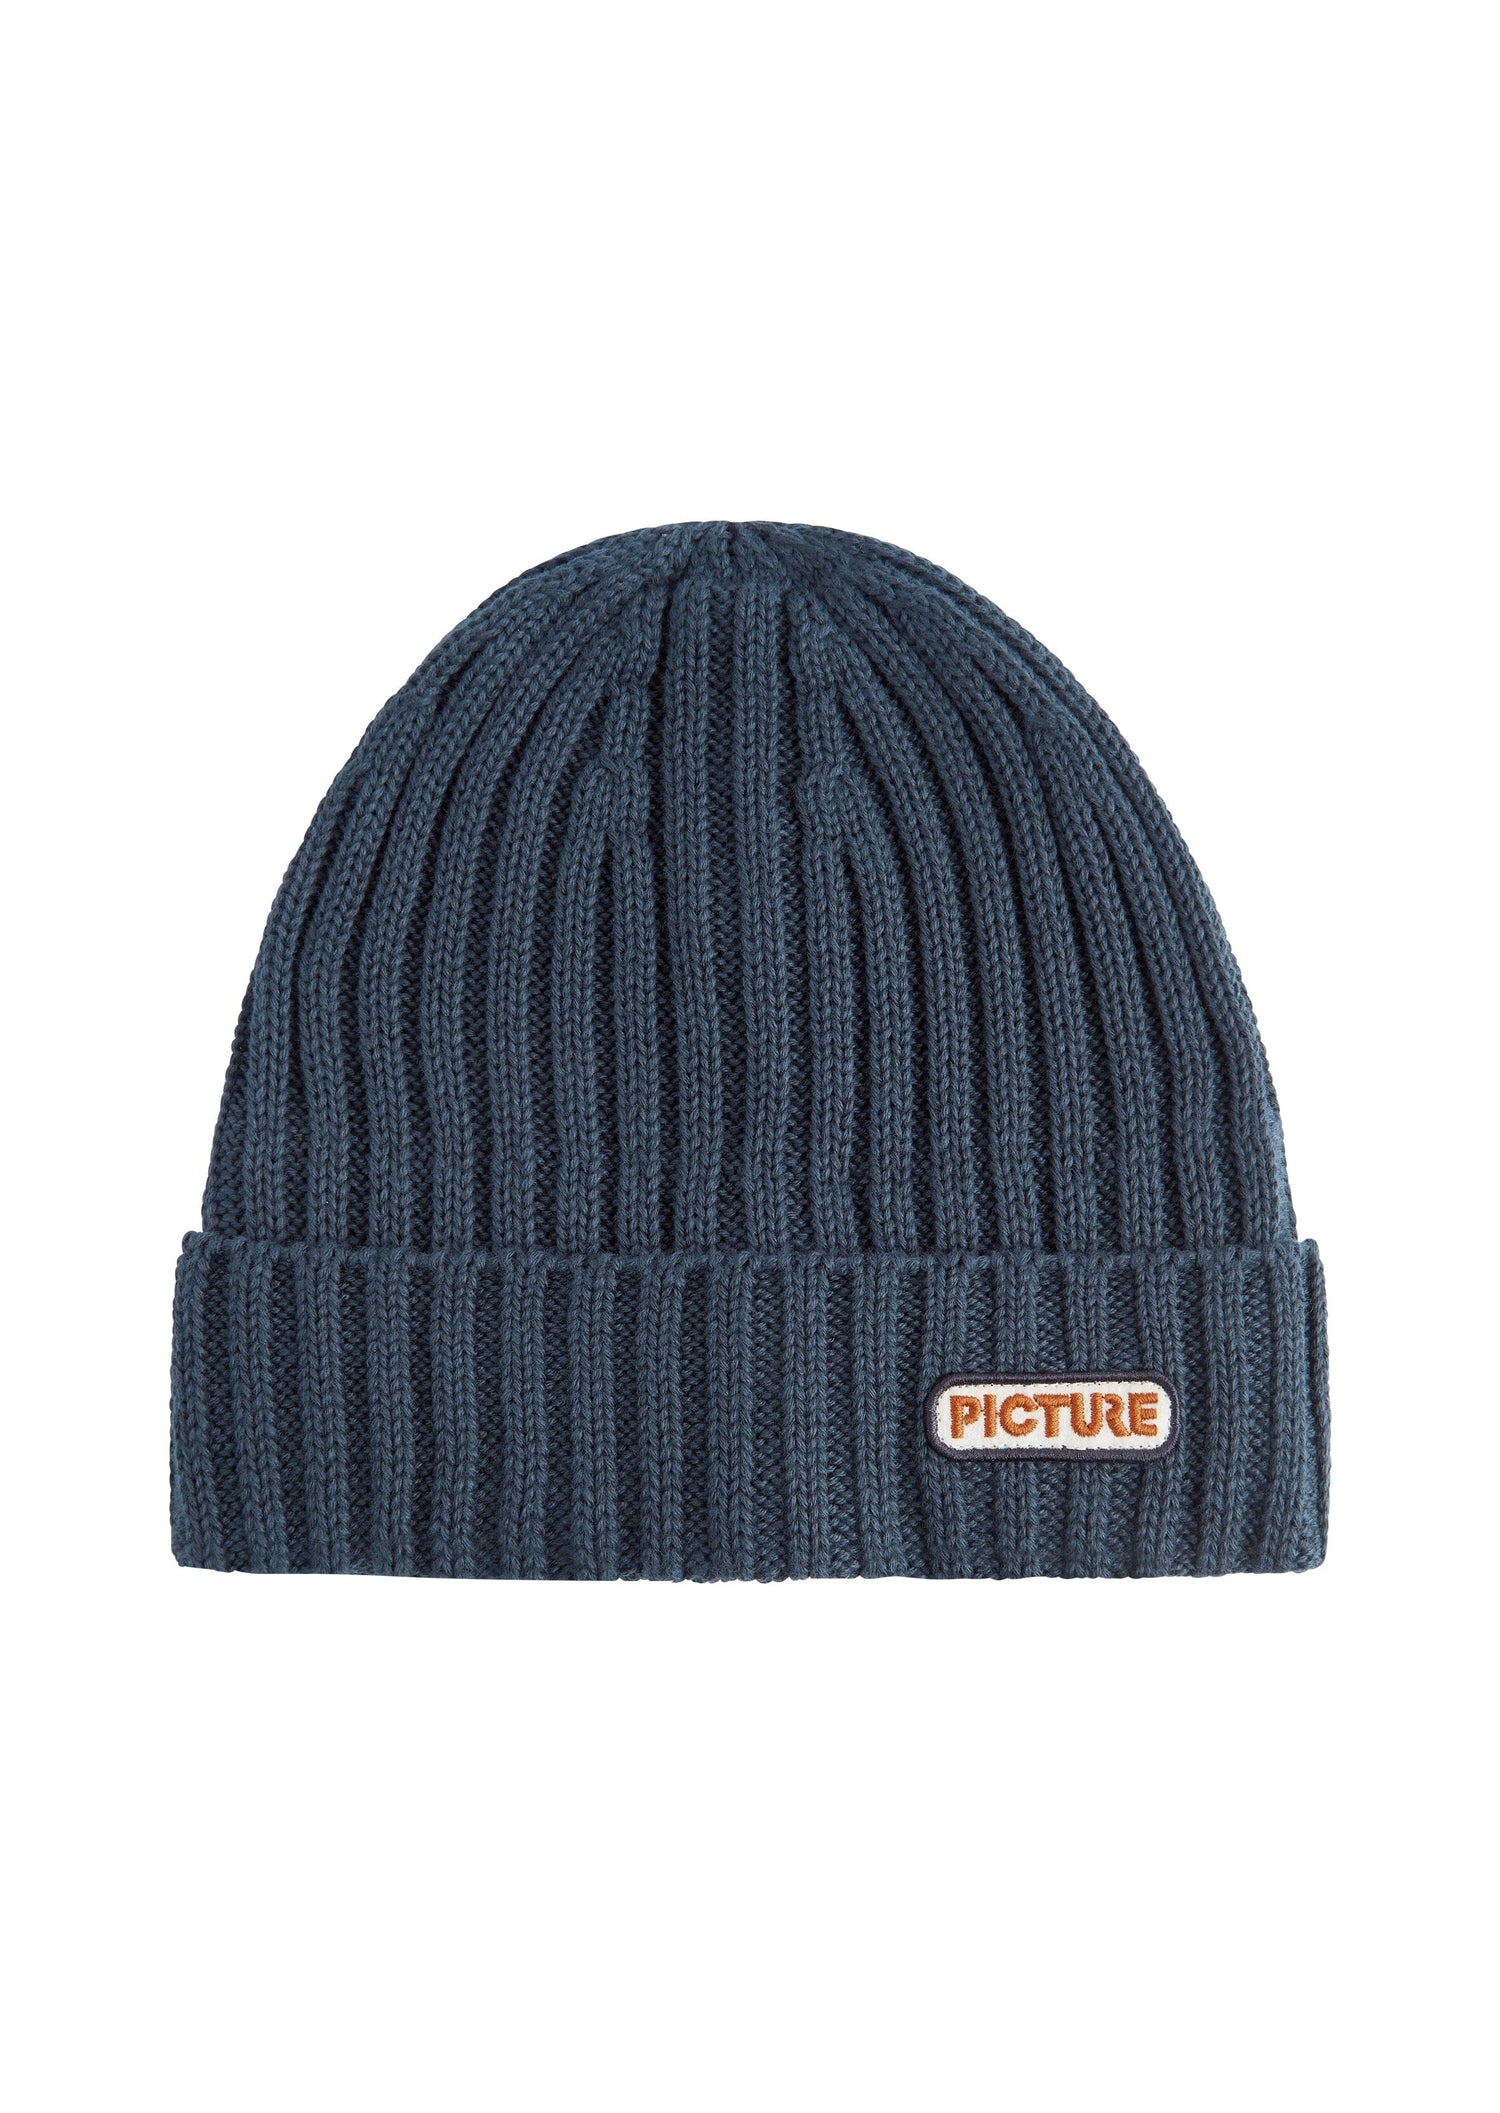 Picture Organic Unisex Ship Beanie - Recycled Polyester & Wool Dark Blue Headwear